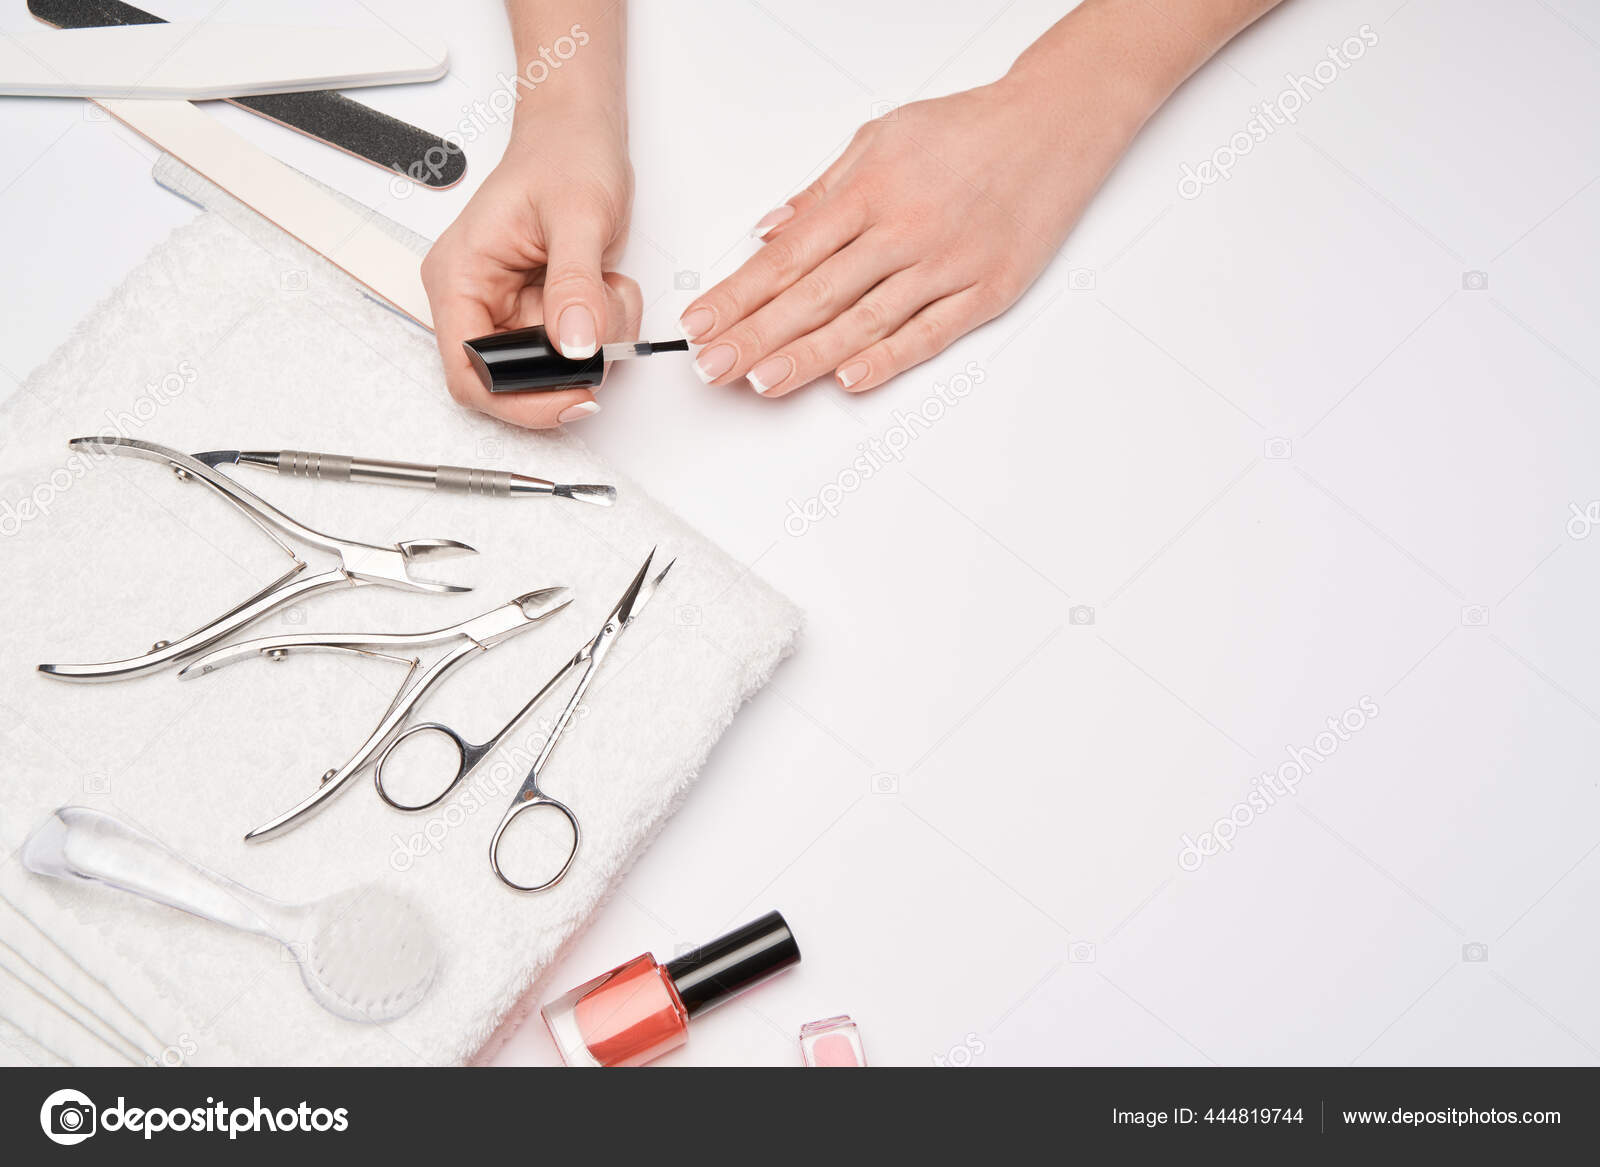 Top view of manicure tools set for nail care over light background - brush,  scissors, nail polish, file and tweezers Stock Photo by ©repinanatoly  444819744